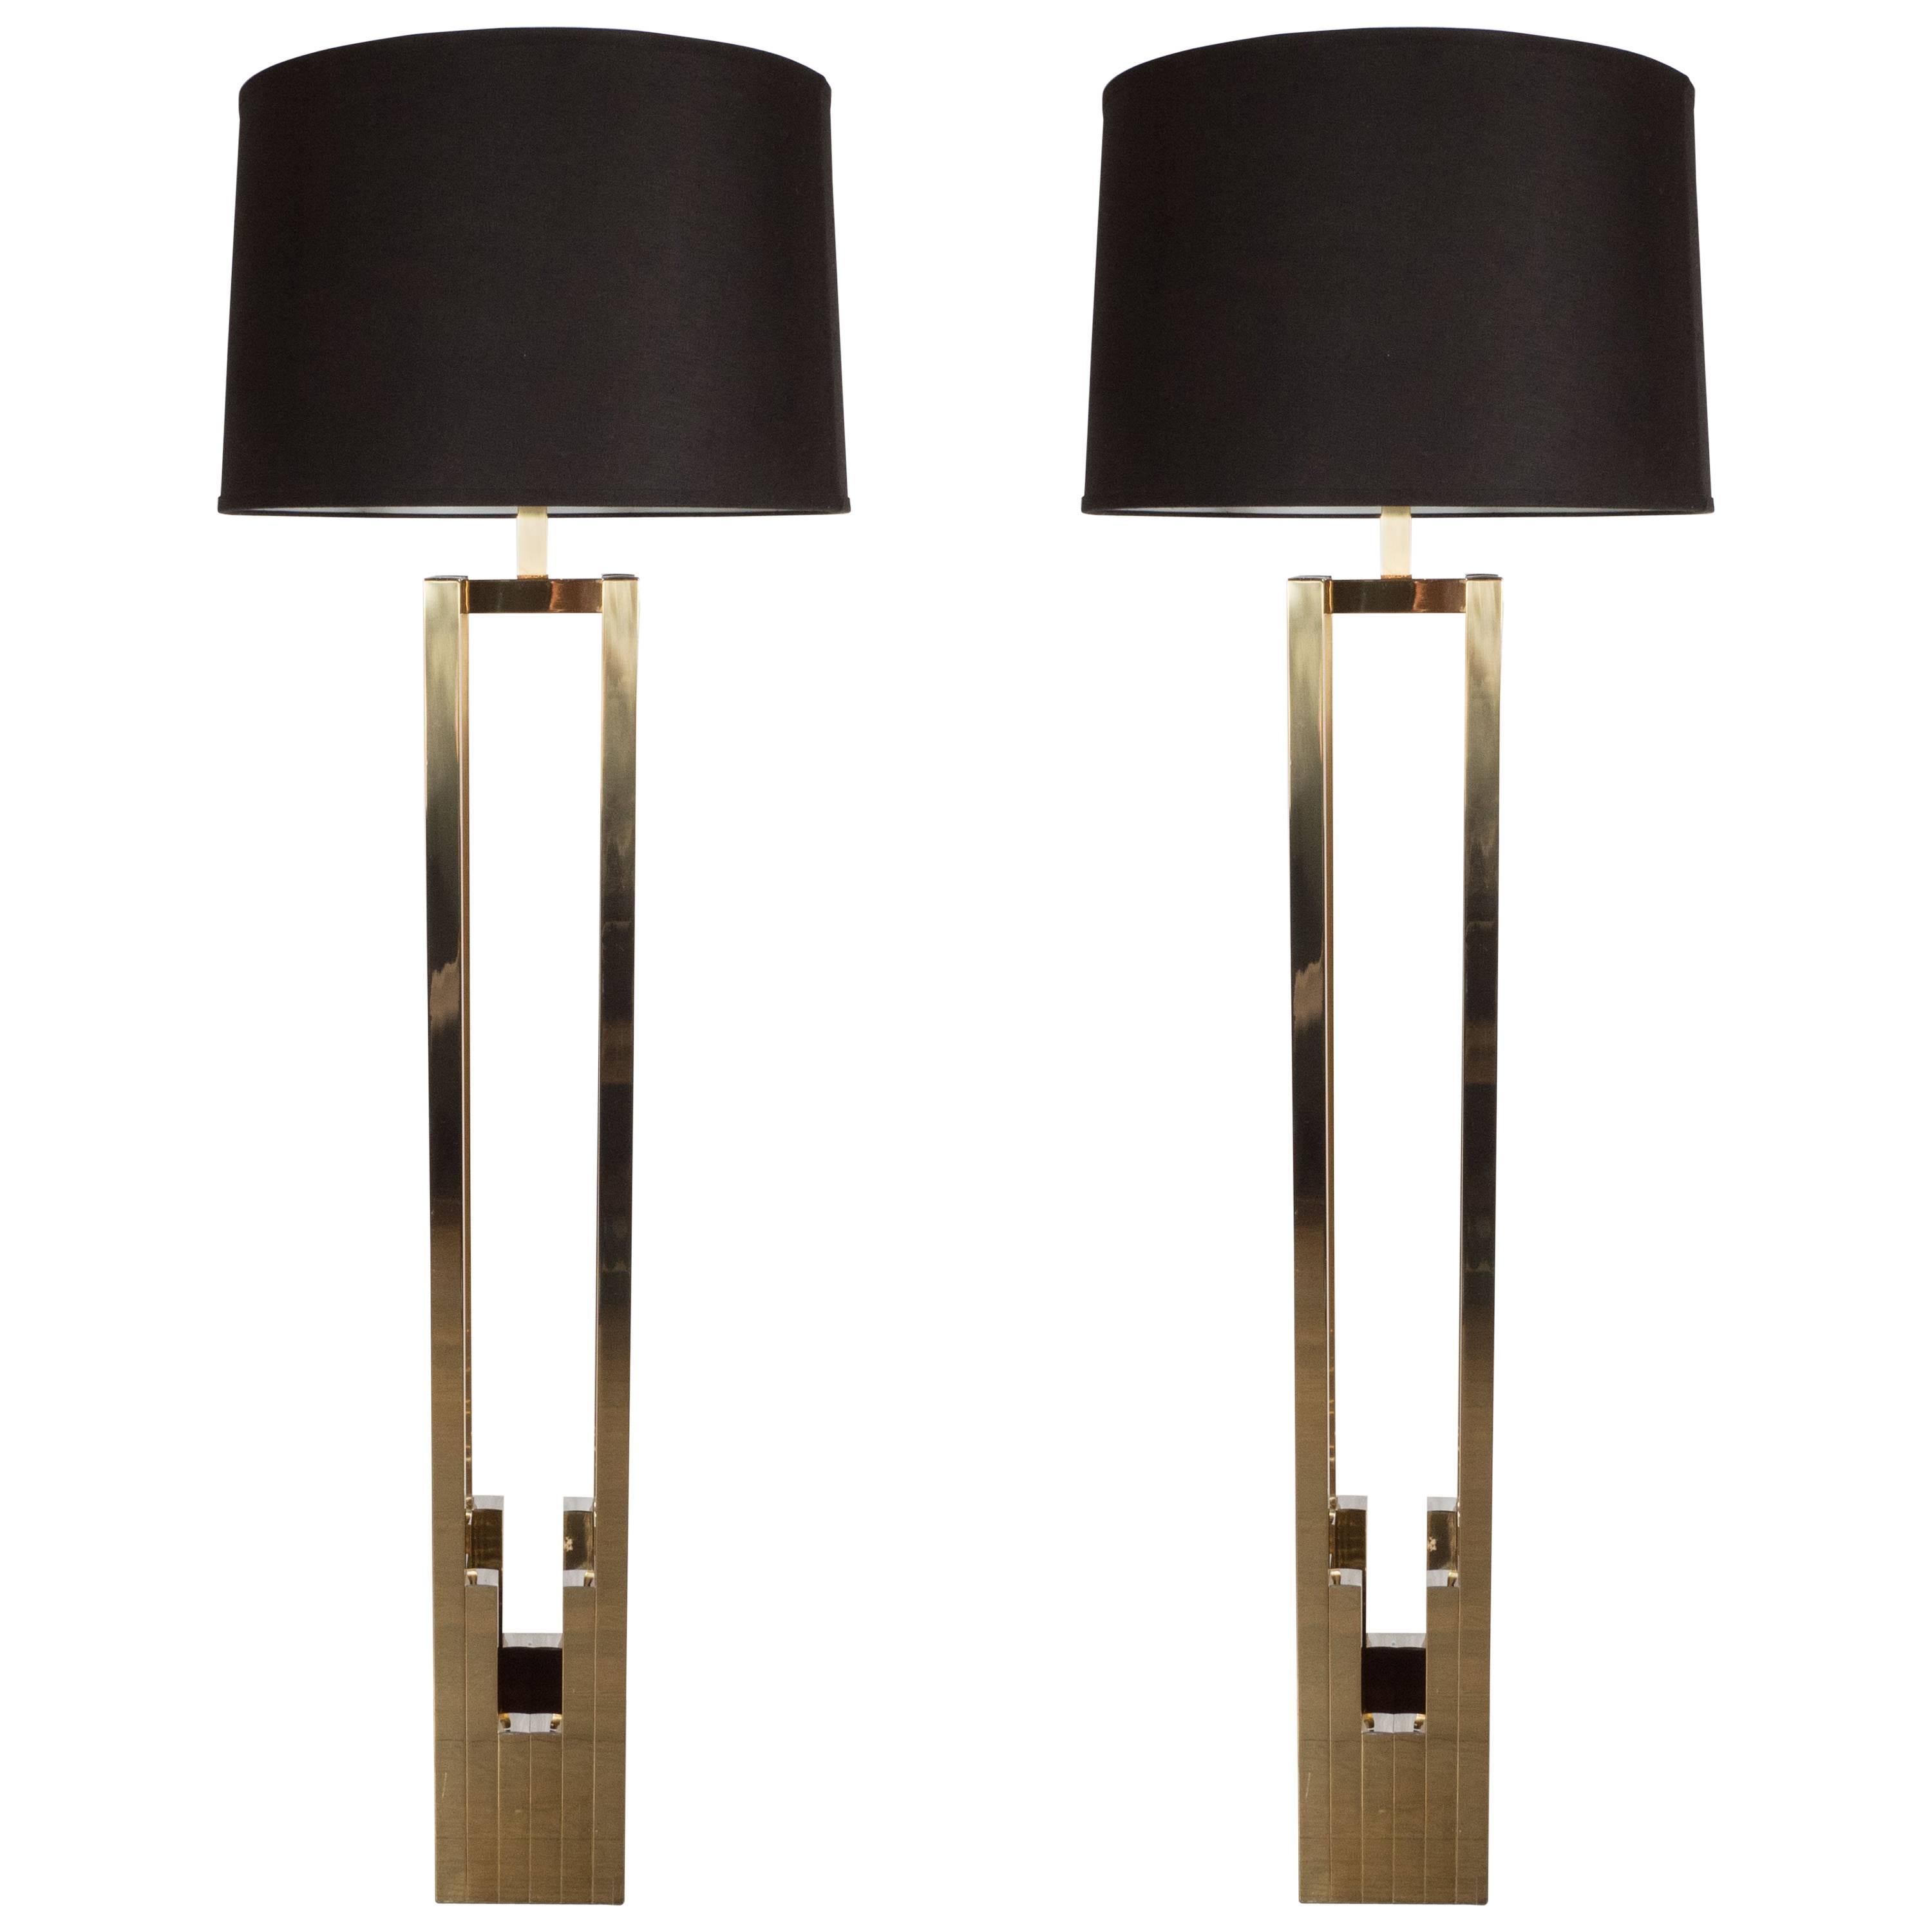 Pair of Mid-Century Modernist Chrome and Brass Floor Lamps by Willy Rizzo